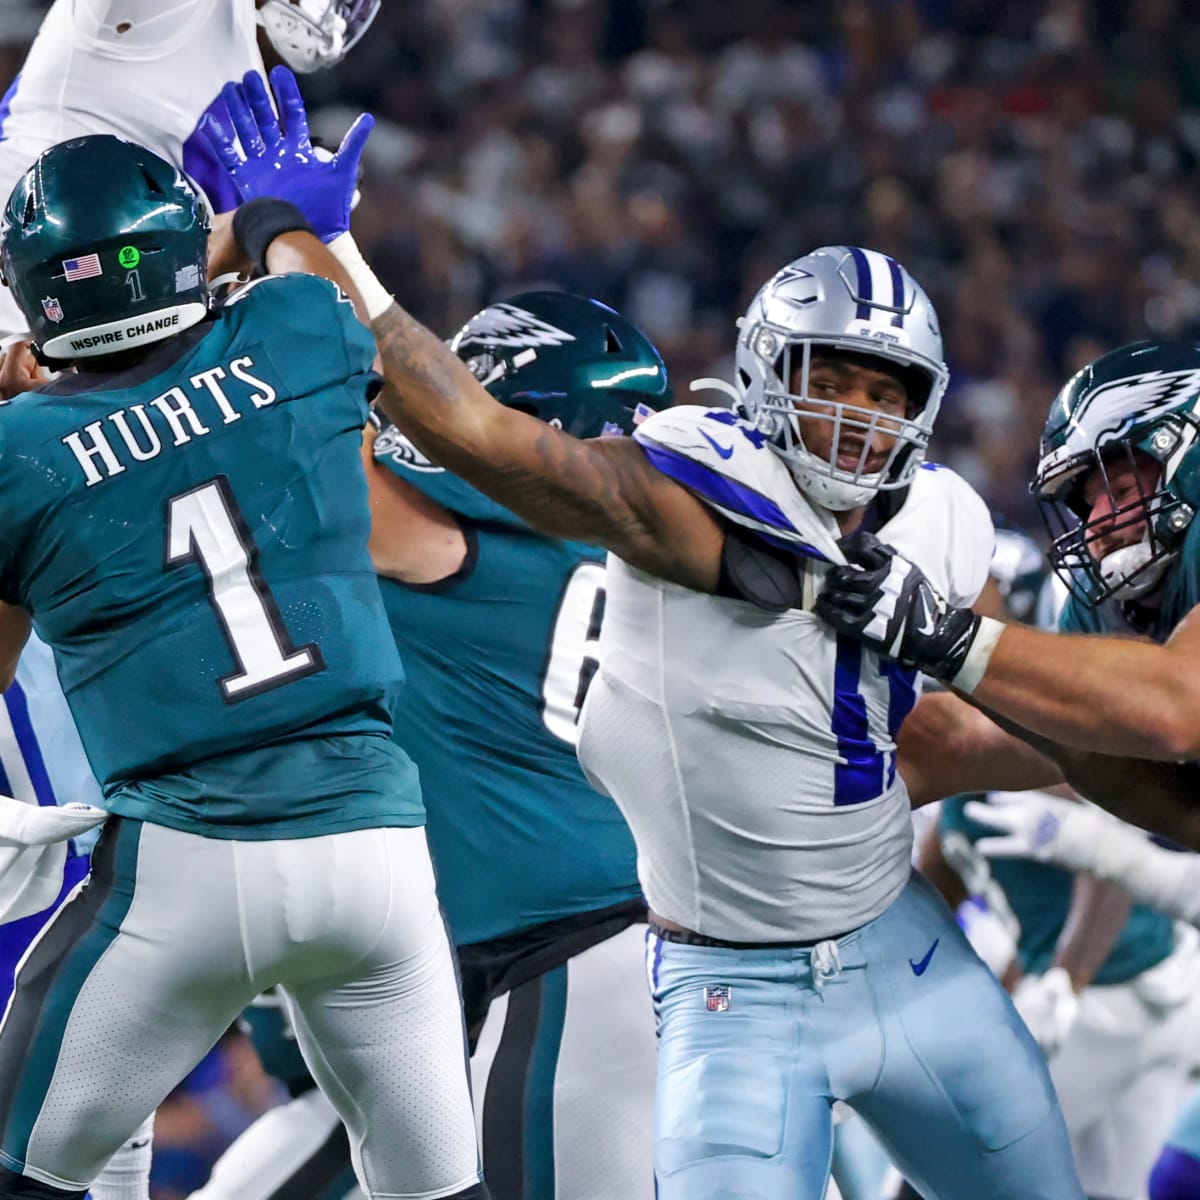 NFC East showdown - Do Eagles or Cowboys have the better roster?﻿ - ESPN